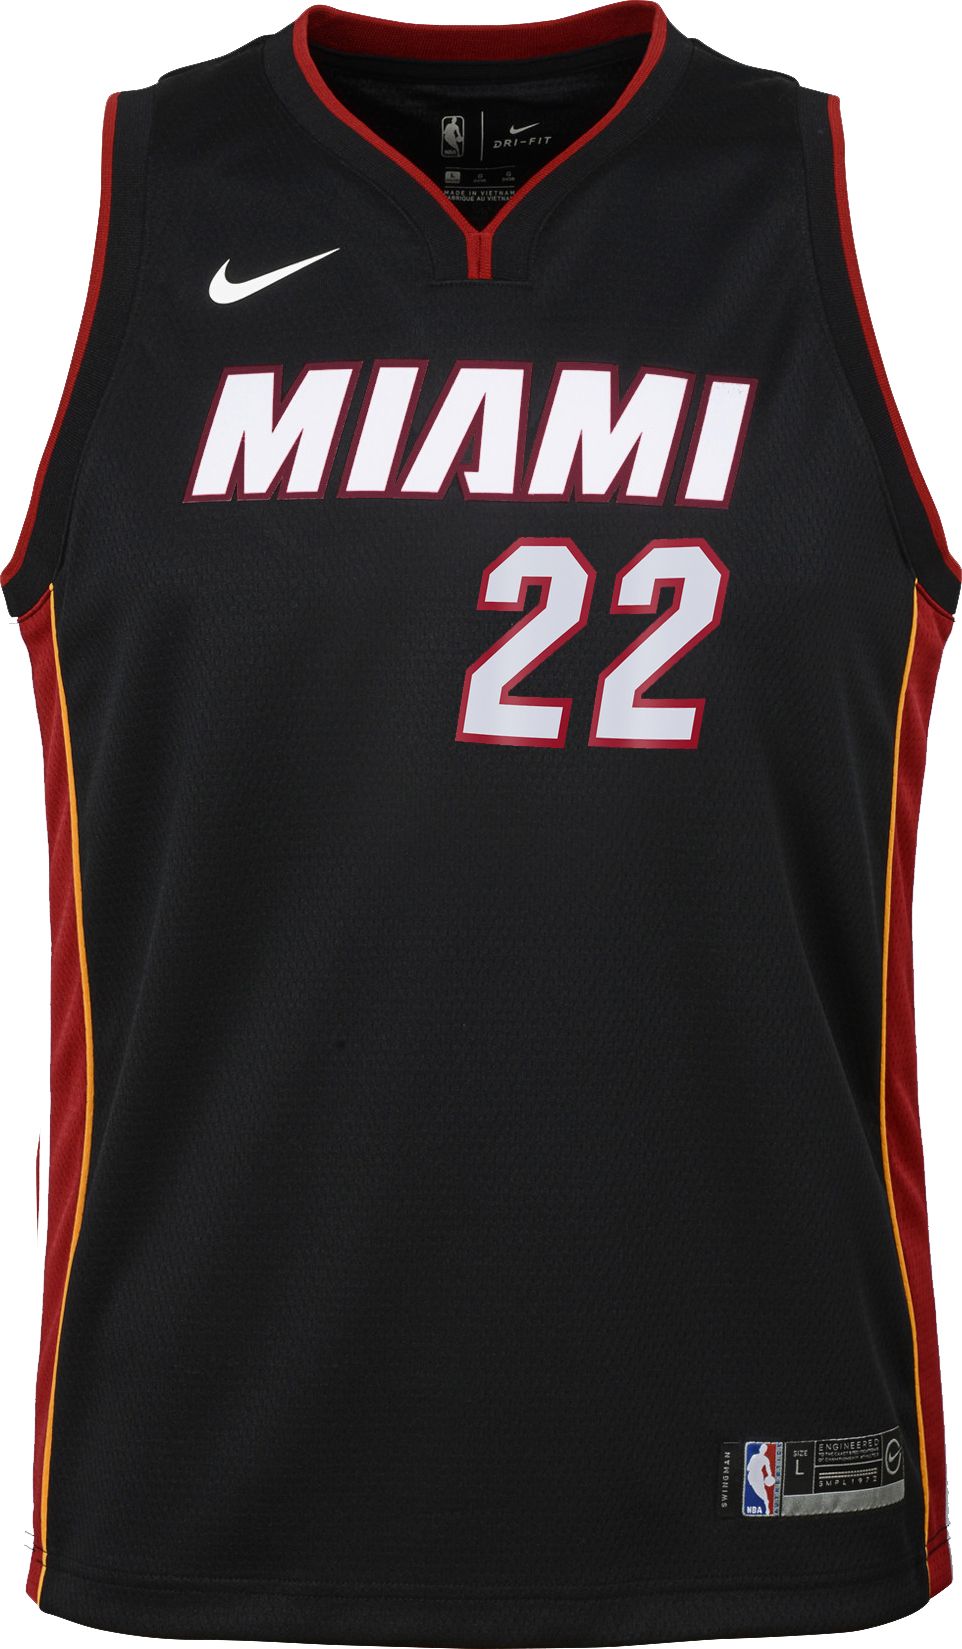 jimmy butler jersey number